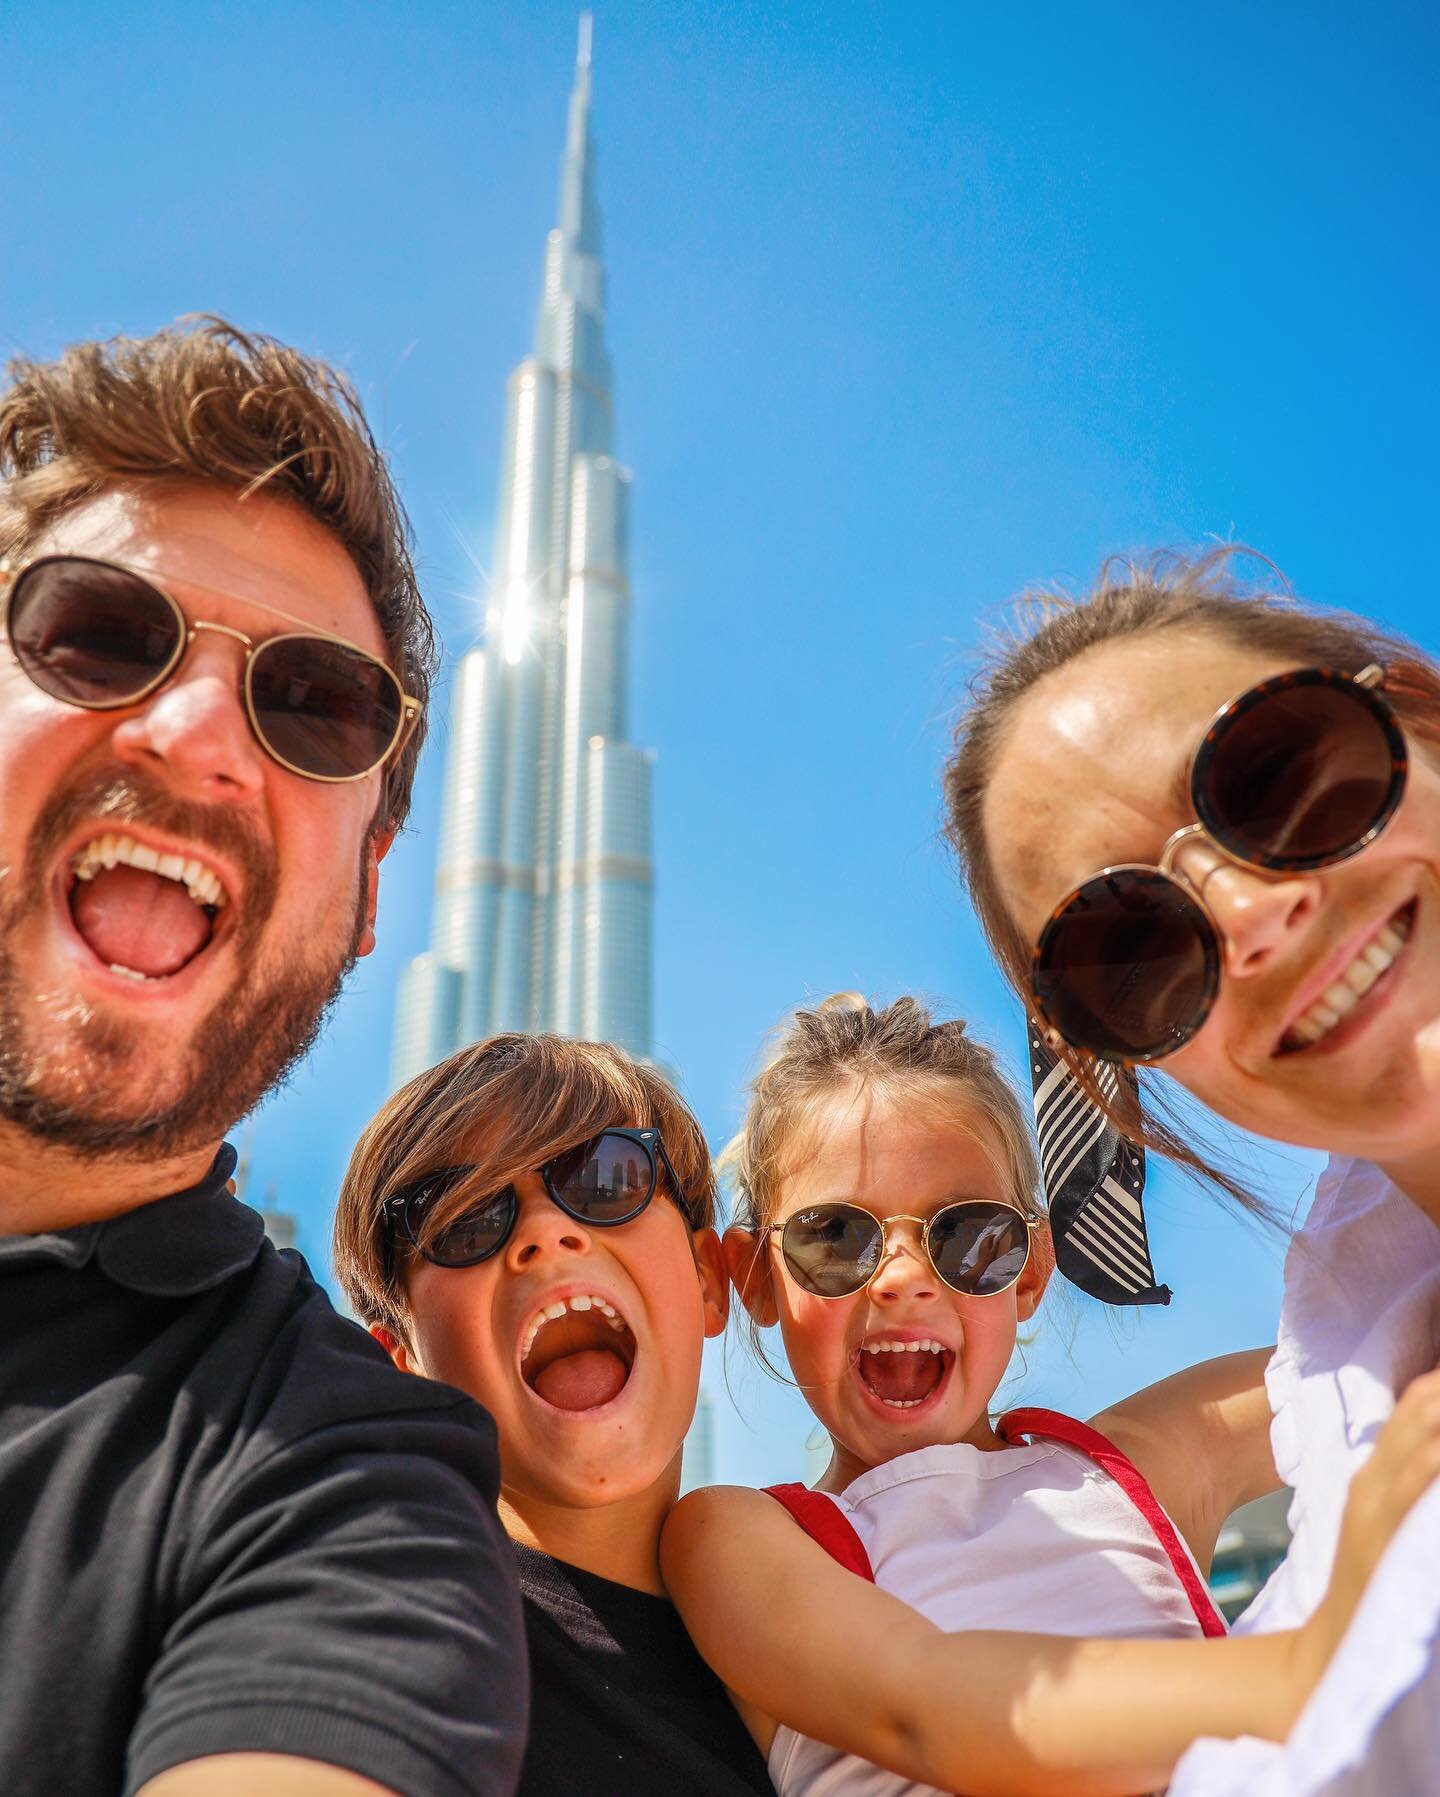 Smiles, sunglasses and starting to grow a @burjkhalifa out of our head. This was Dubai 2020! If you want to reread what we did, take a look at our website! If you have any questions about this trip, let us know! #dubai #visitdubai #burjkhalifa #trave